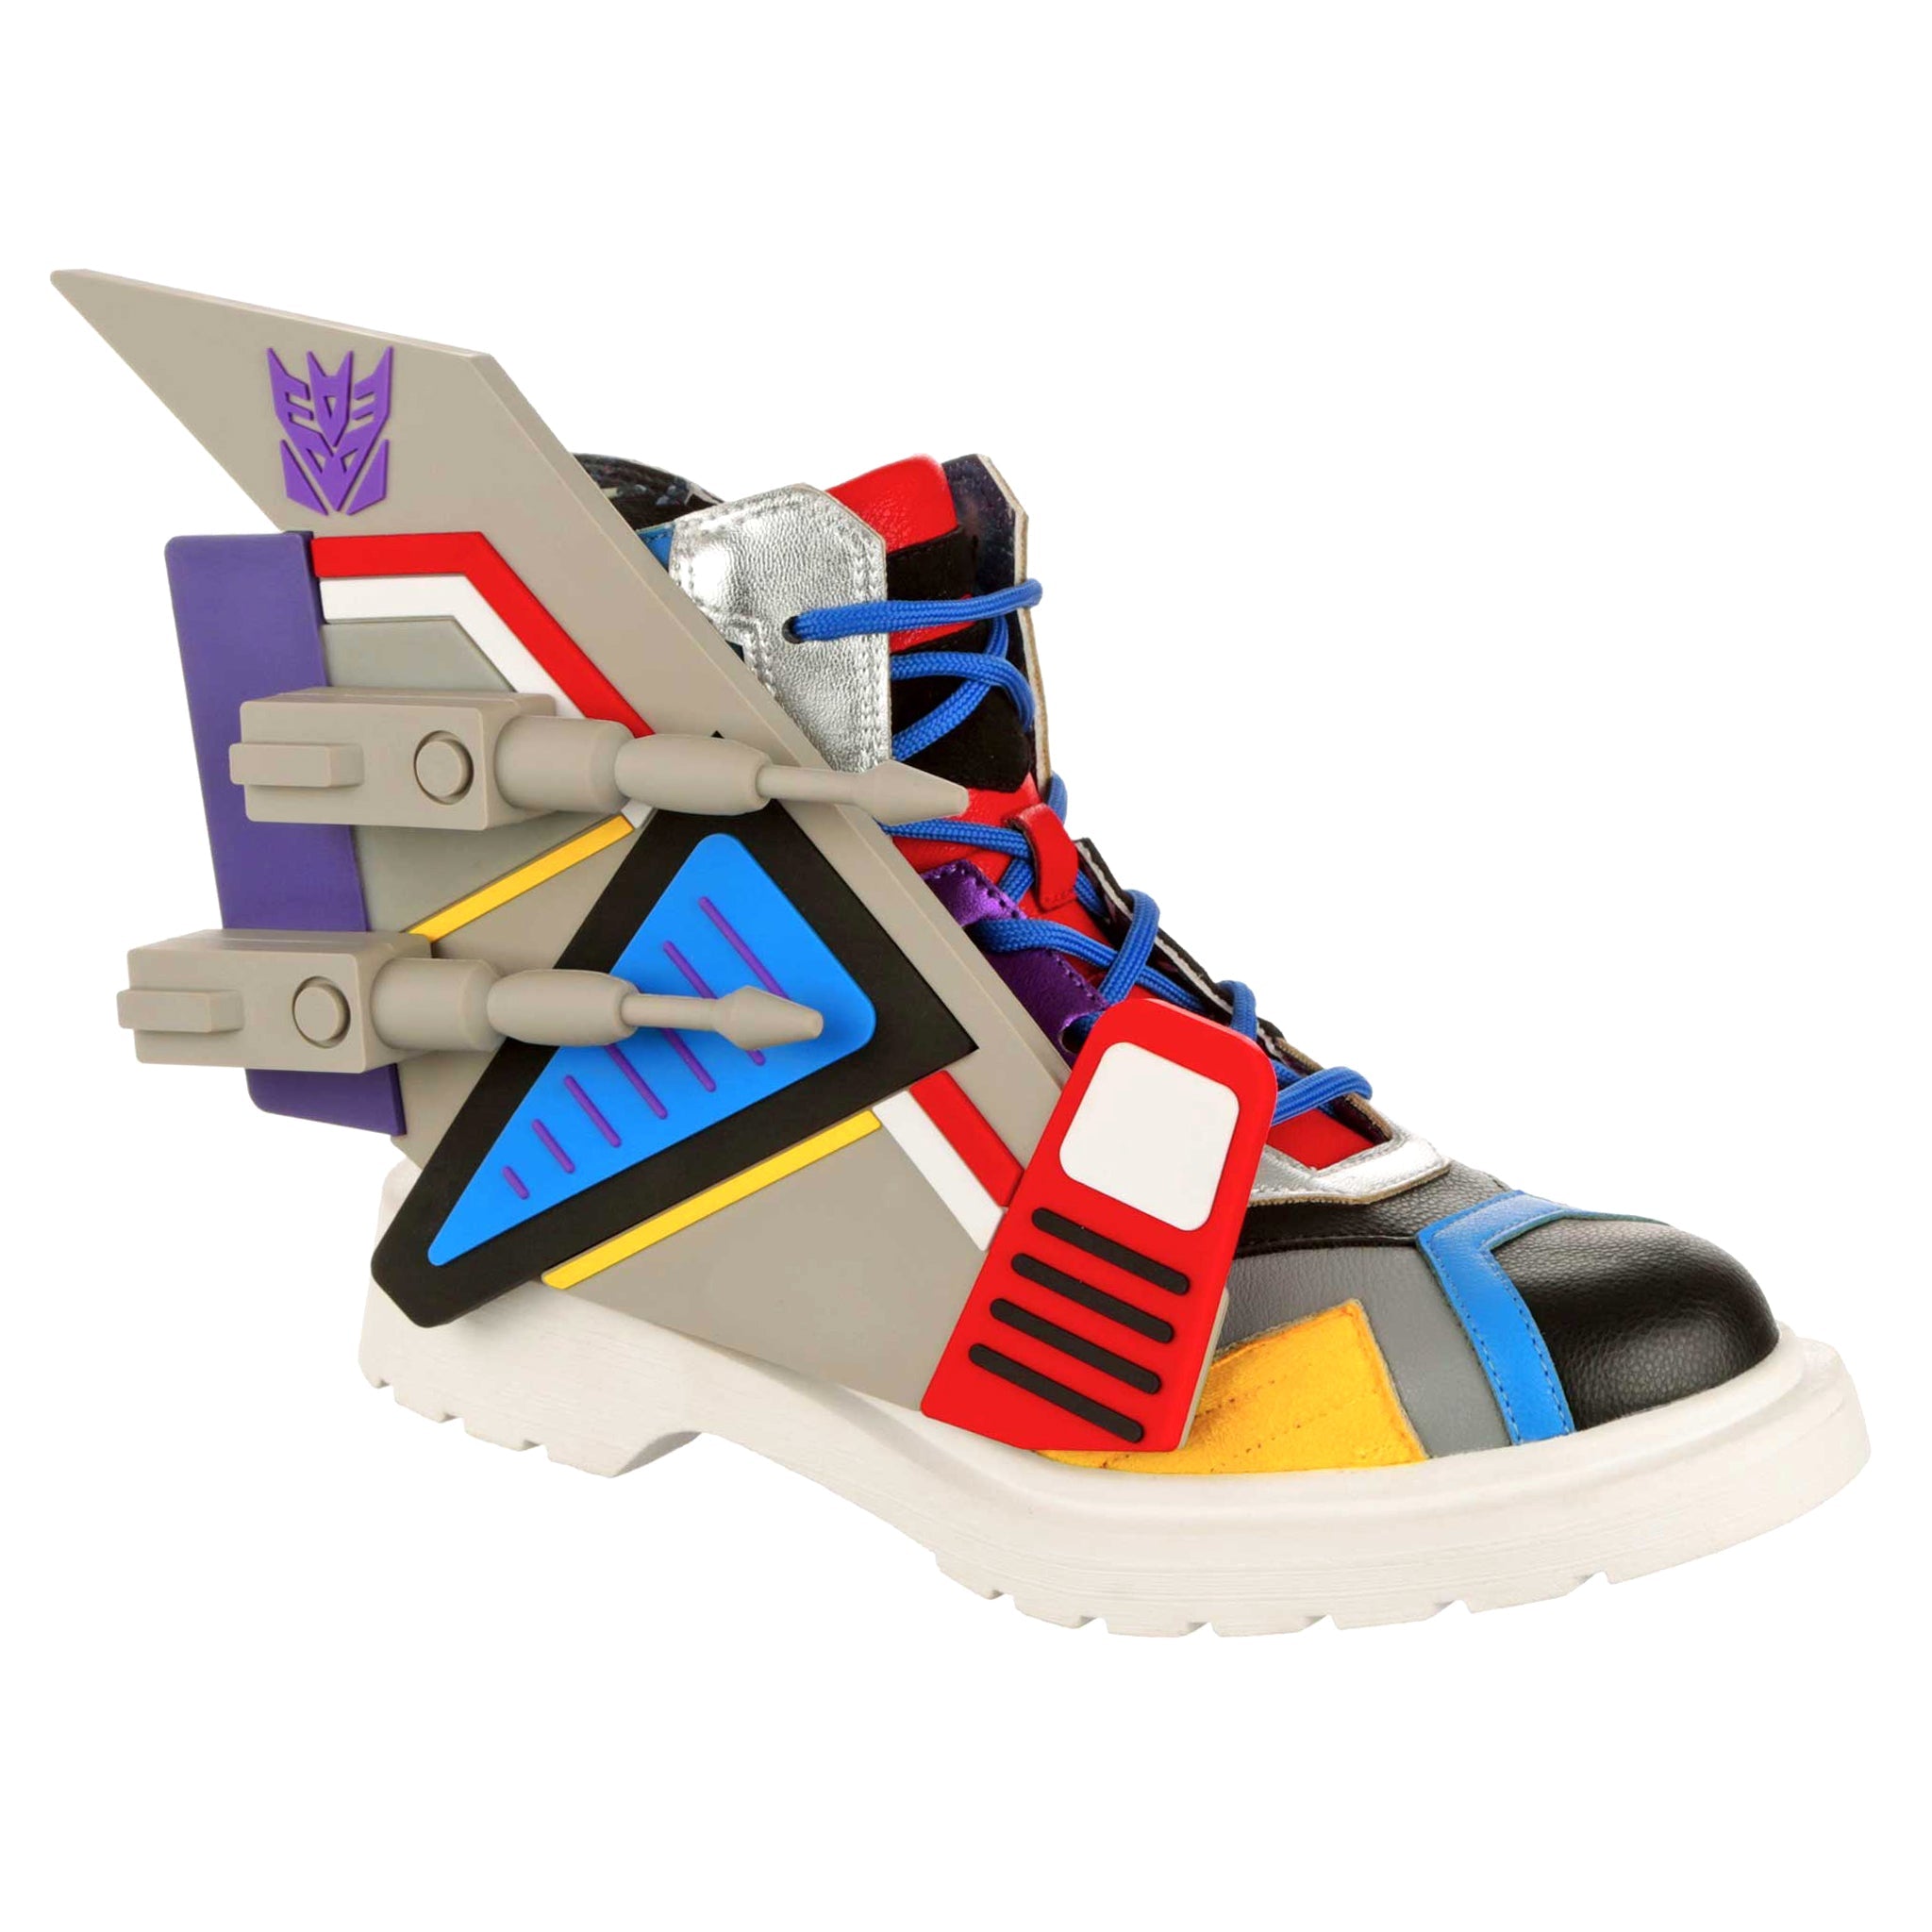 Transformers-themed grey ankle boots with blue laces, a black toe and chunky grey details. Removable grey jet wings sit on the side of the lace-up boots. A purple Decepticon logo sit on the side of the grey boots, finished off with a white chunky sole.